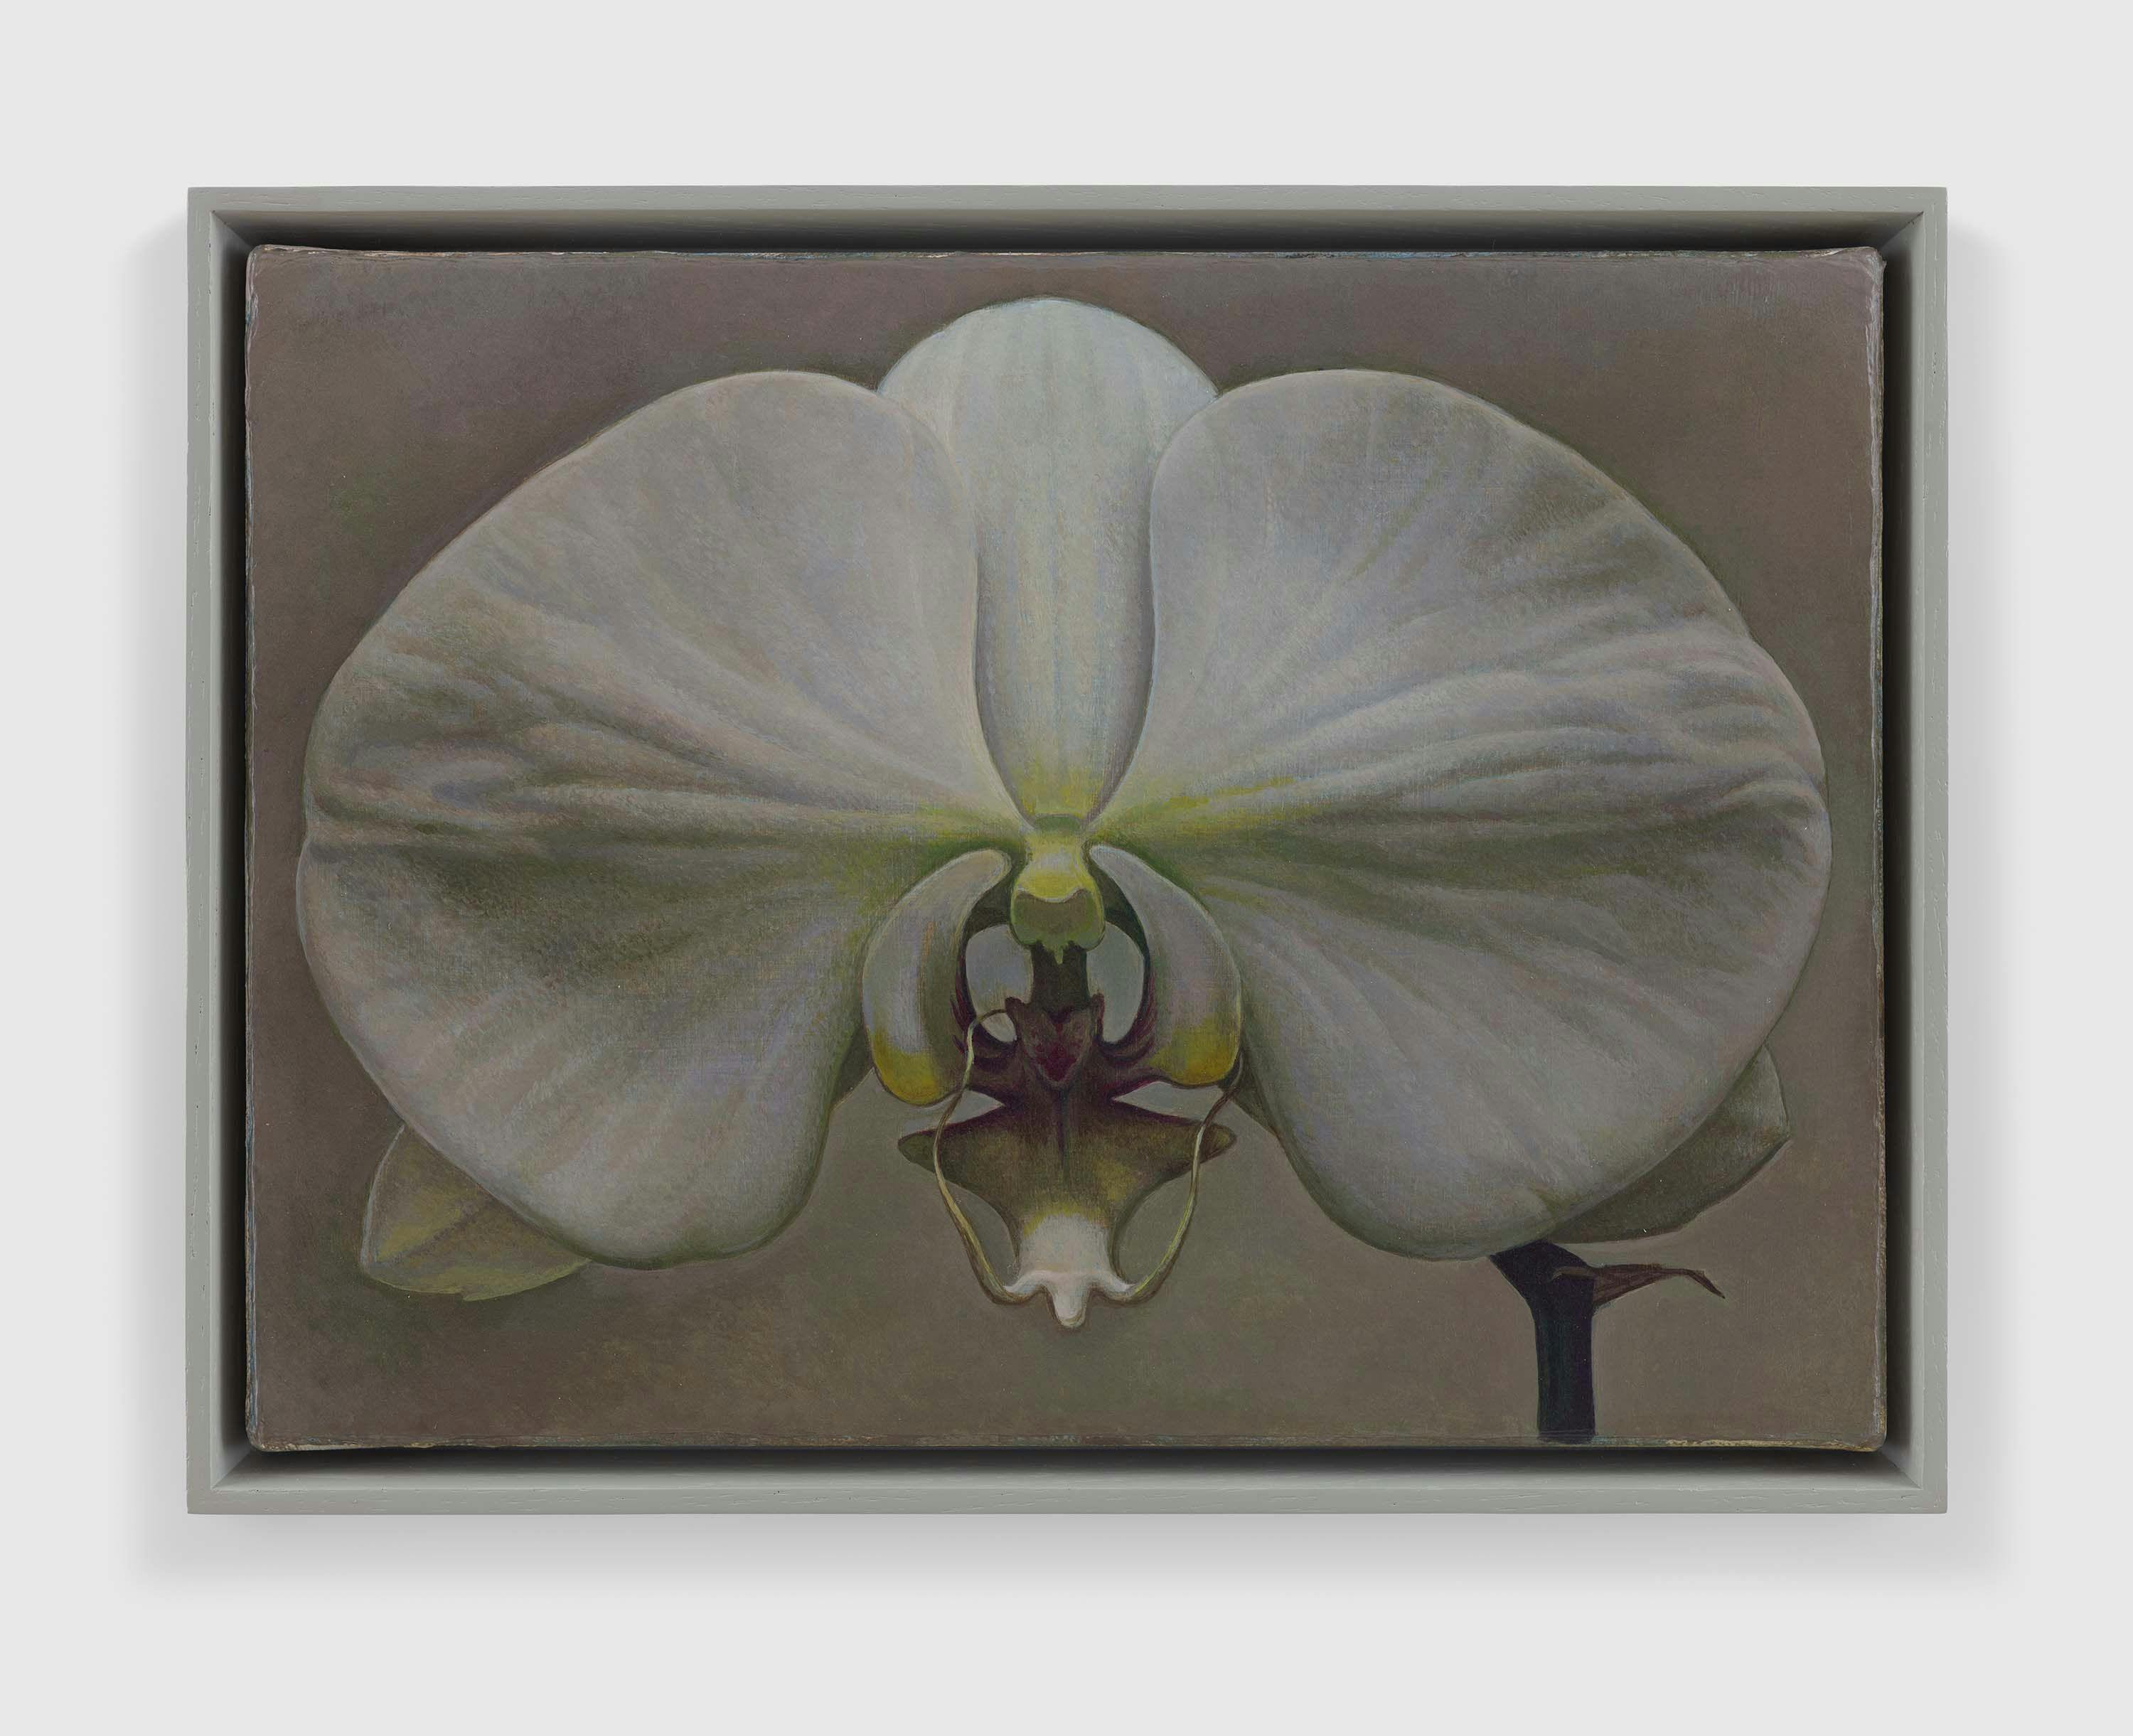 A painting by Liu Ye, titled Flower No.4 (Homage to Karl Blossfeldt), dated 2022.